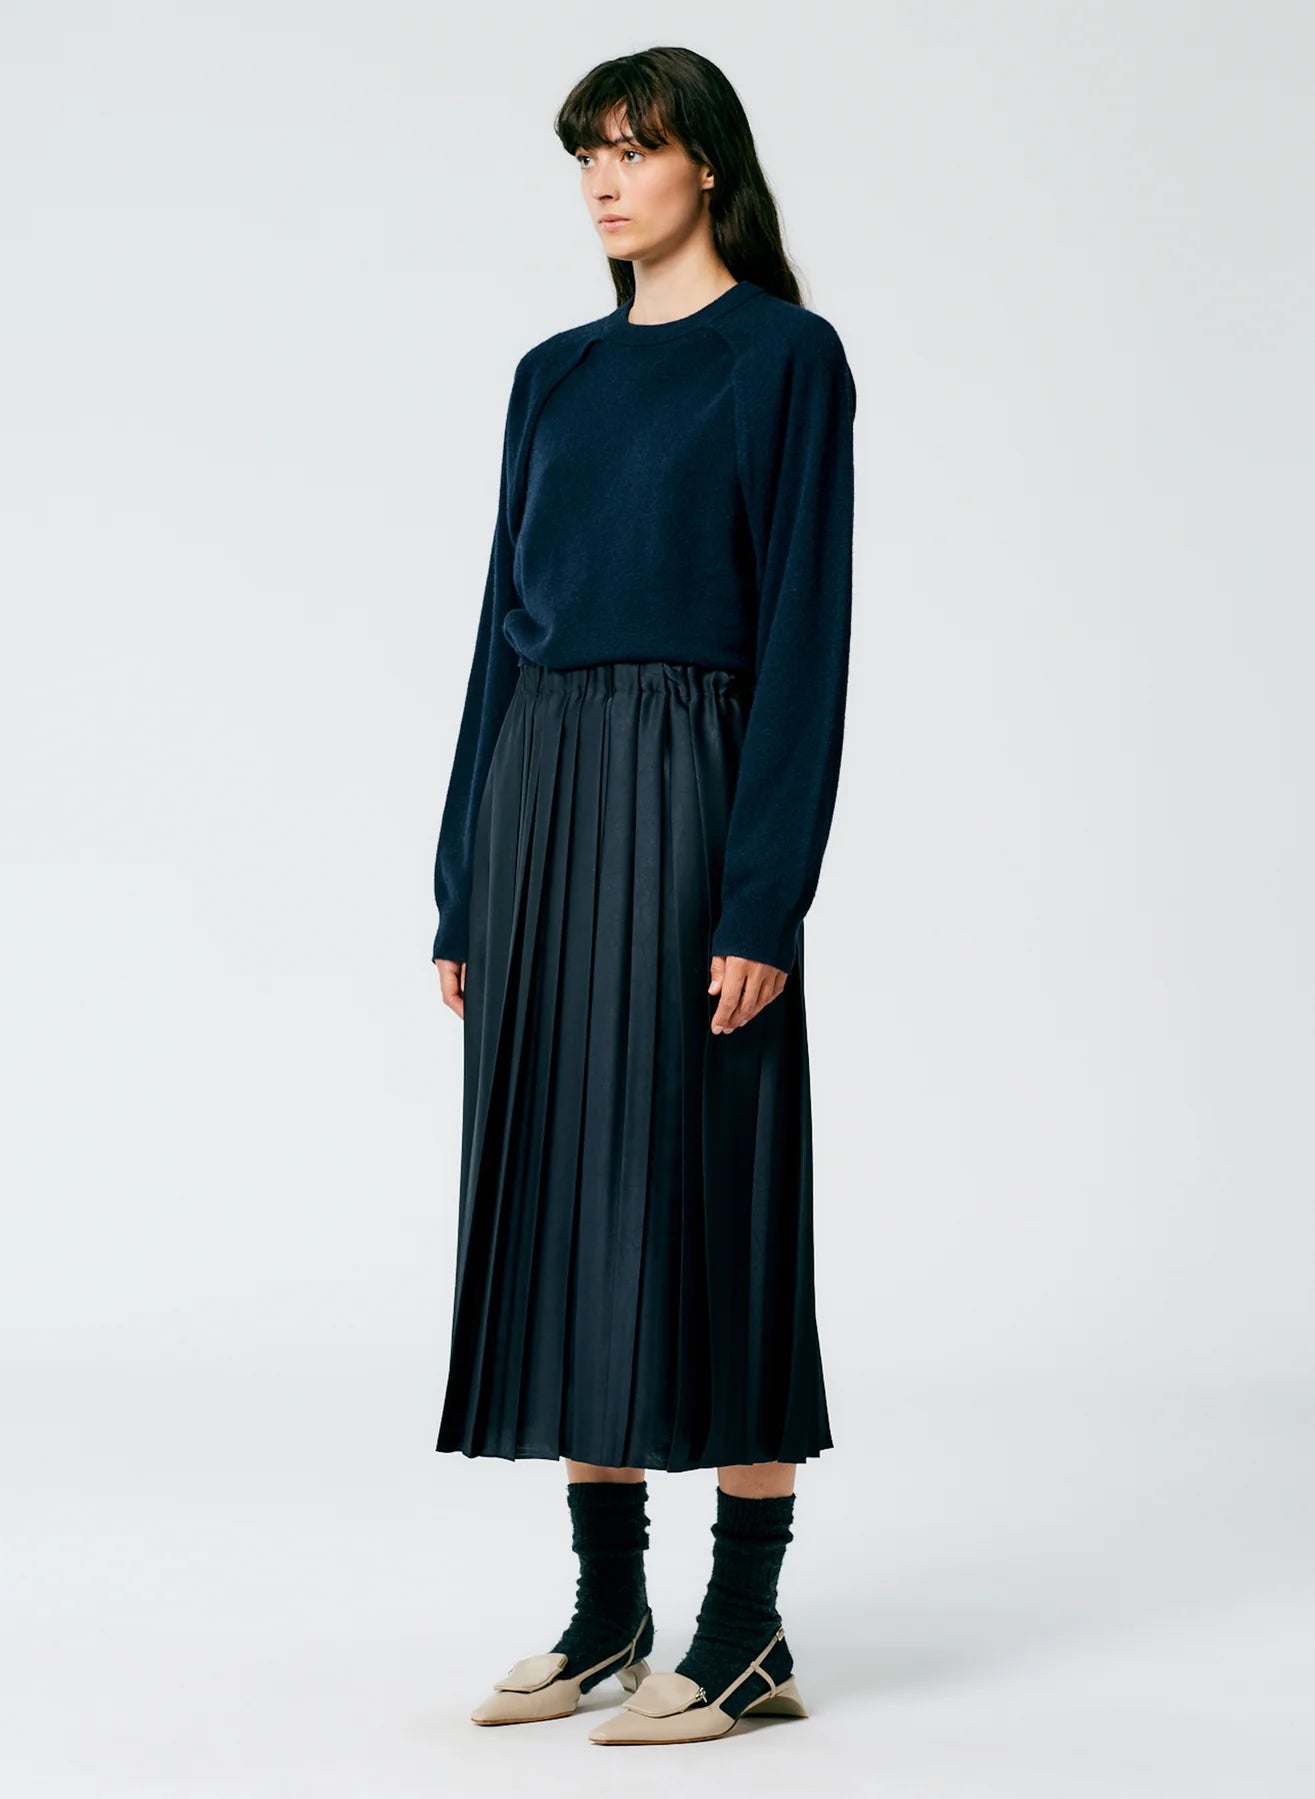 Feather Weight Pleated Pull On Skirt - Navy